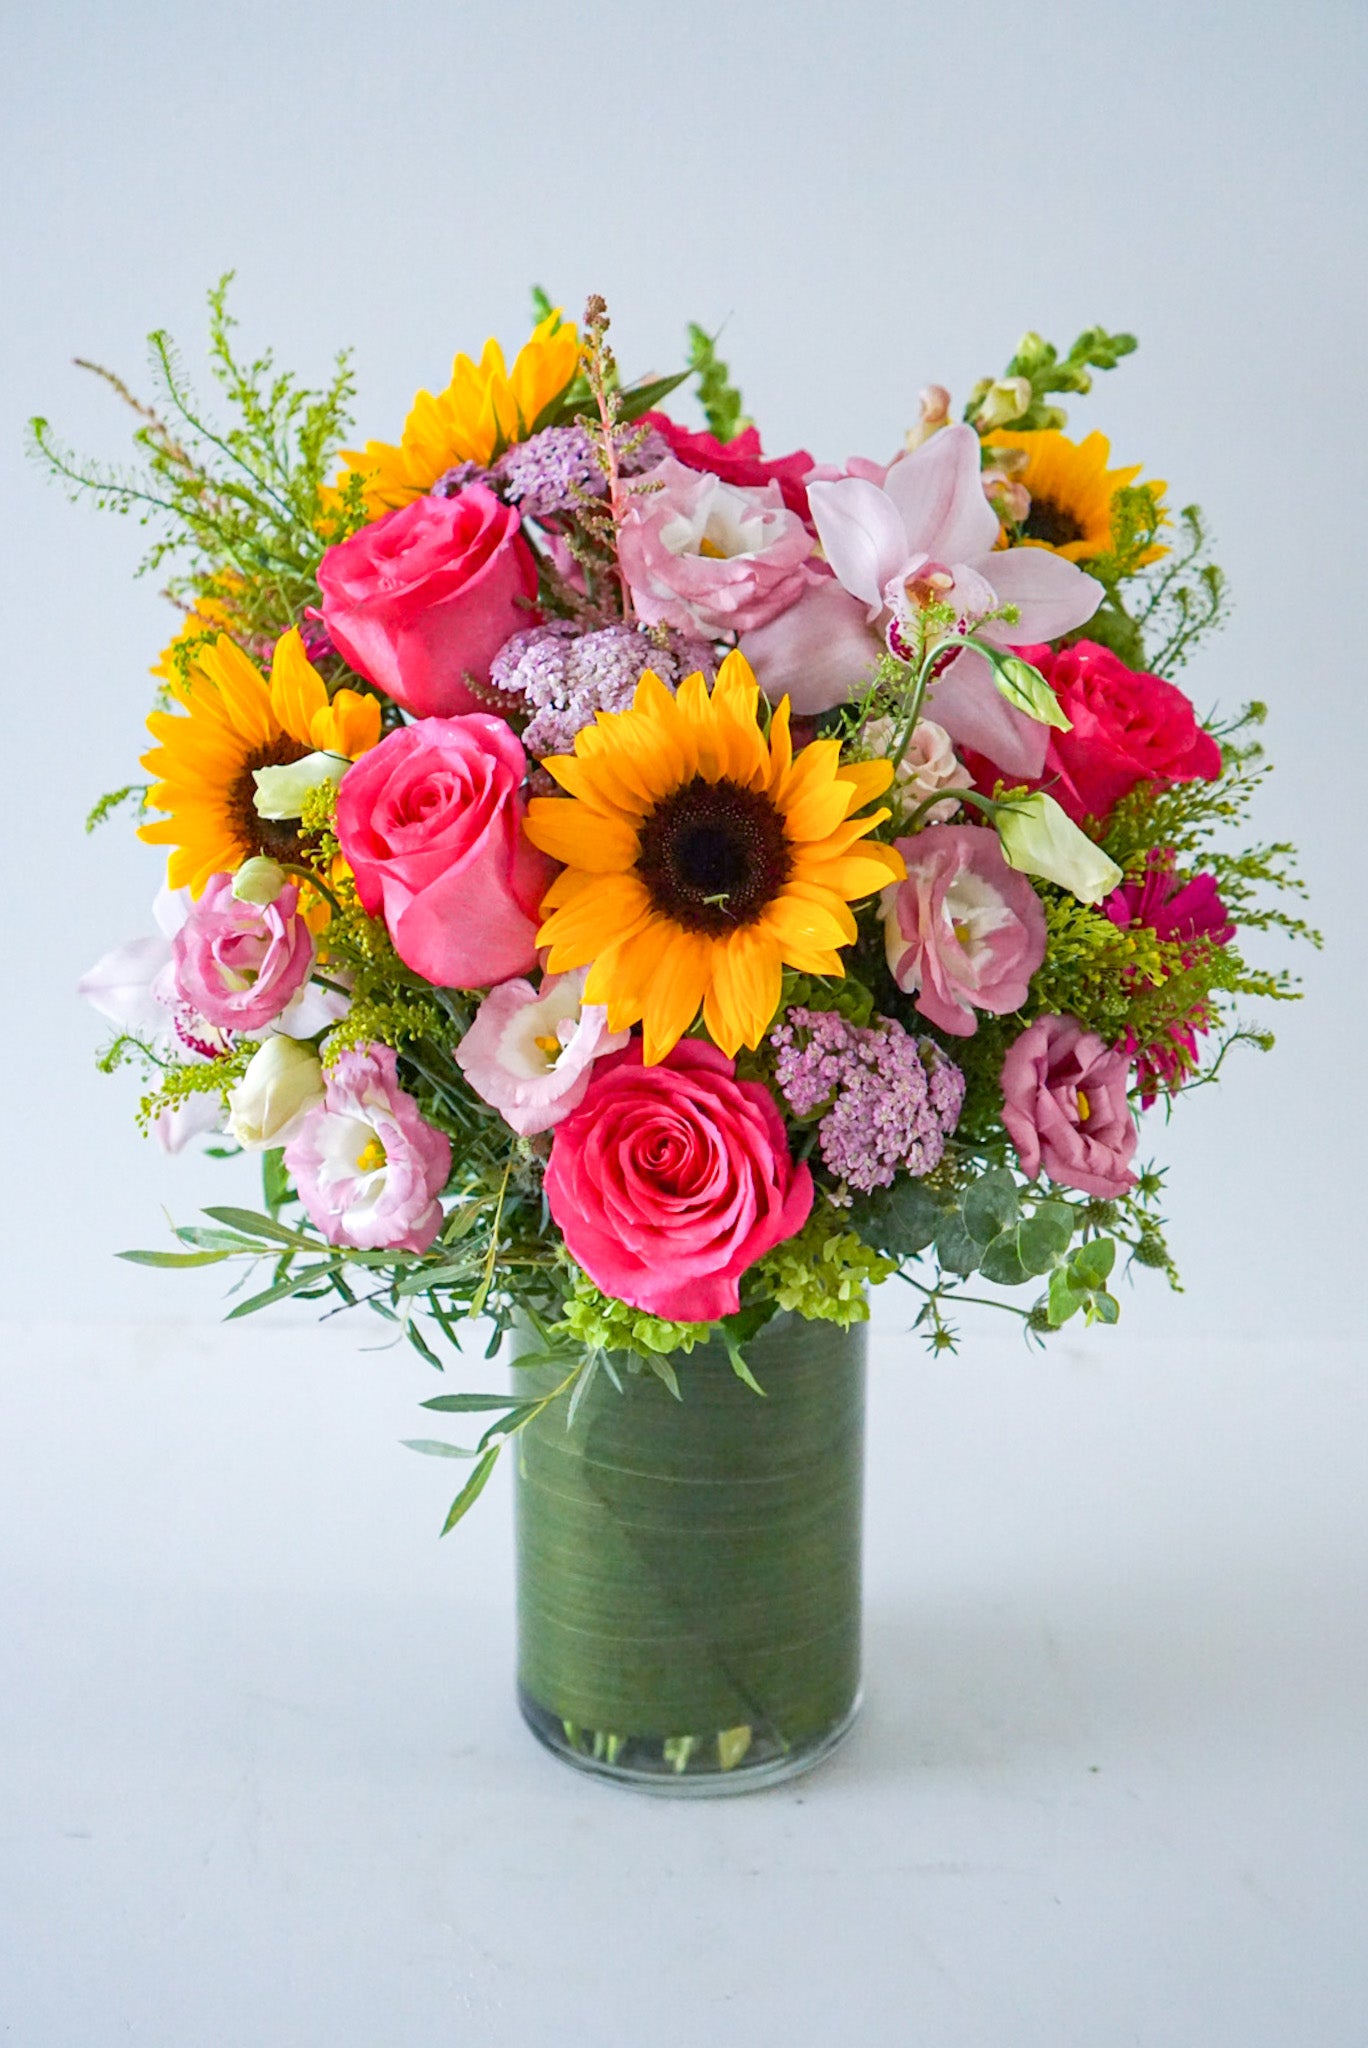  A bright summery arrangement, Summer Soiree is an ideal gift sure to brighten their day. This vivacious bouquet is an assortment of hot pink, yellow, orange and green summer blooms.  Delivered in a clear cylinder vase, lined with green ti leave Sunflowers, roses, lisianthus, yallow, cymbidium orchid, snap dragon, solidago, green hydrangeas. The Flower Nook- Toronto Florist- Flowers delivery Toronto